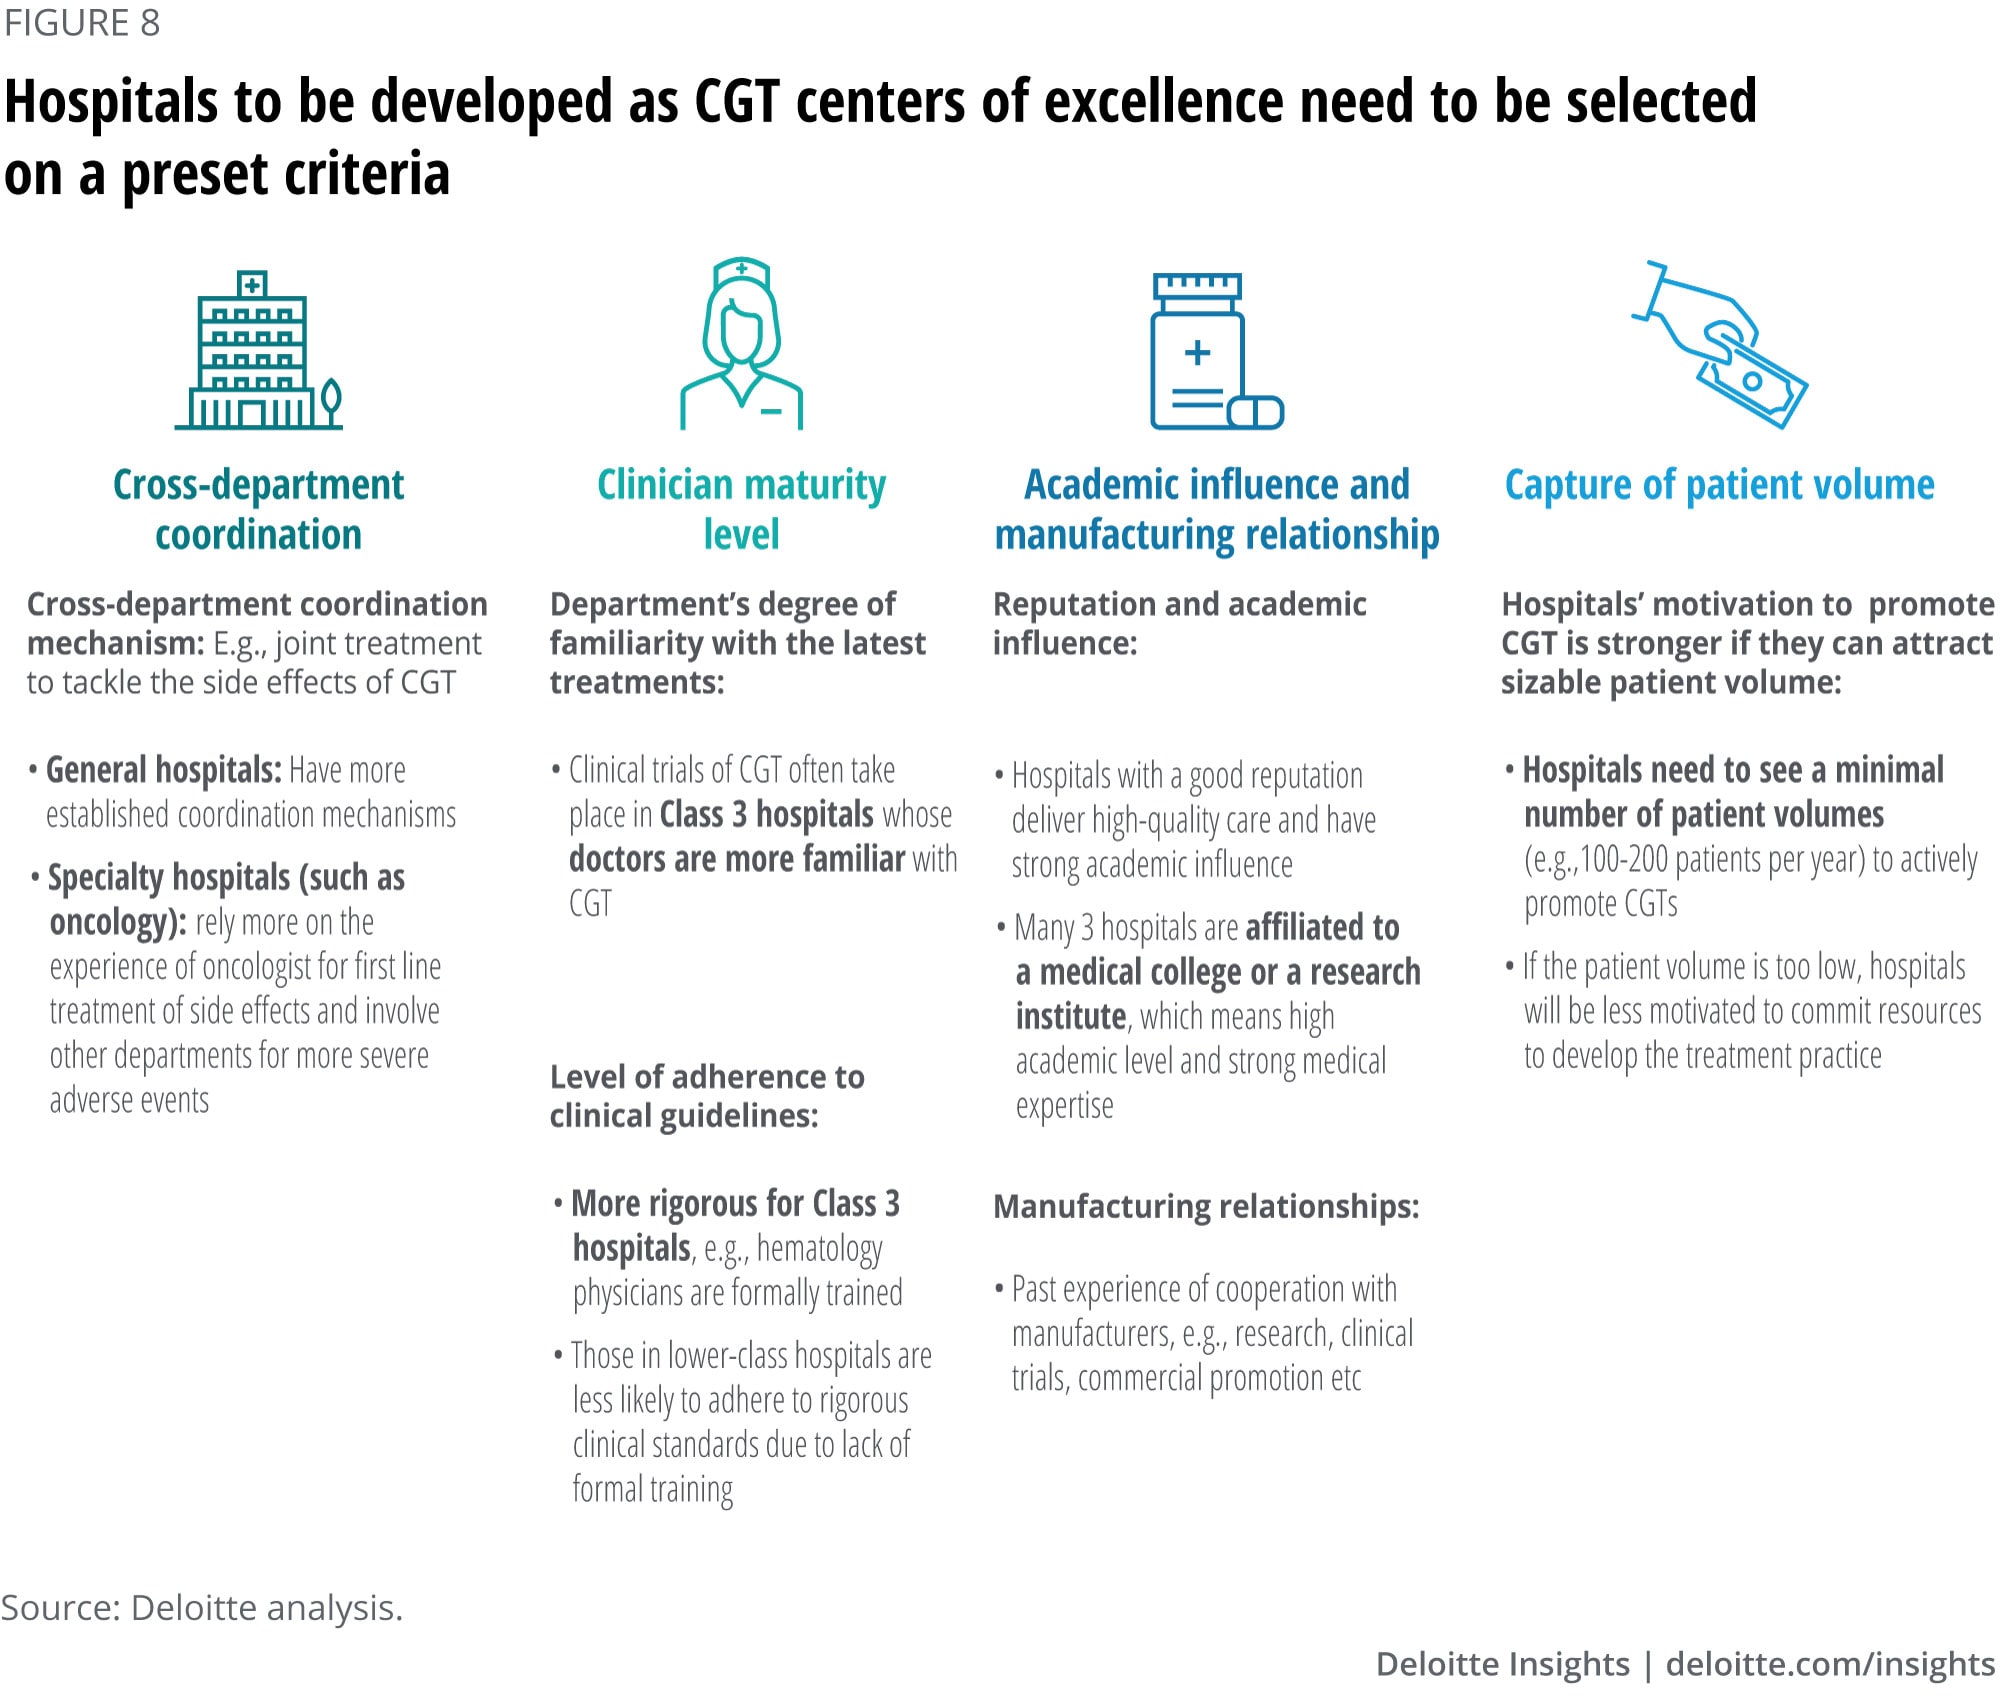 Hospitals to be developed into CGT CoEs need to be selected on preset criteria